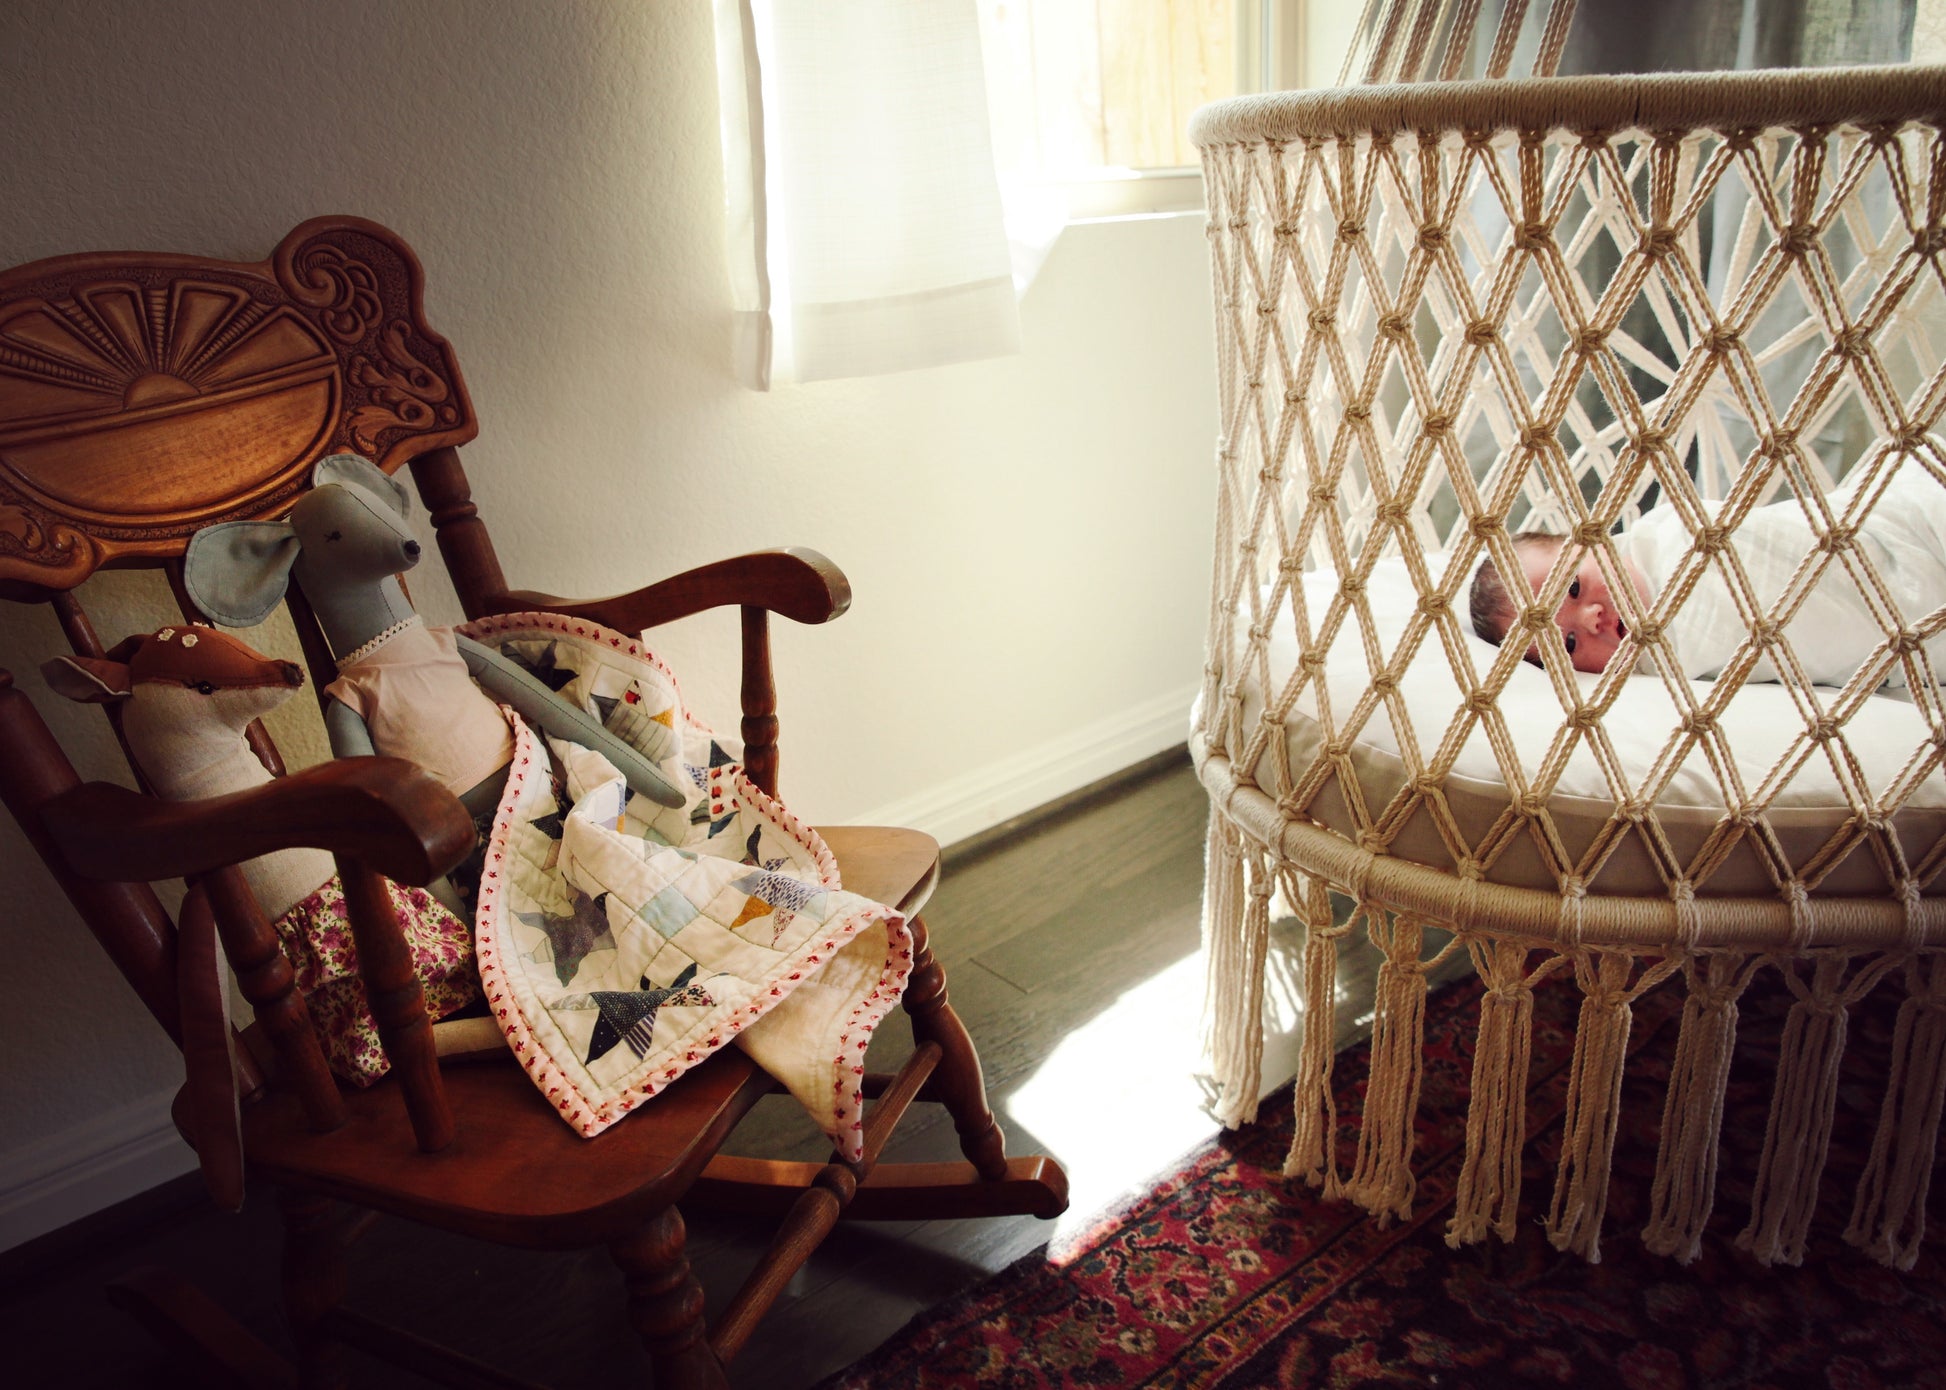 rocking chair near by a hanging crib